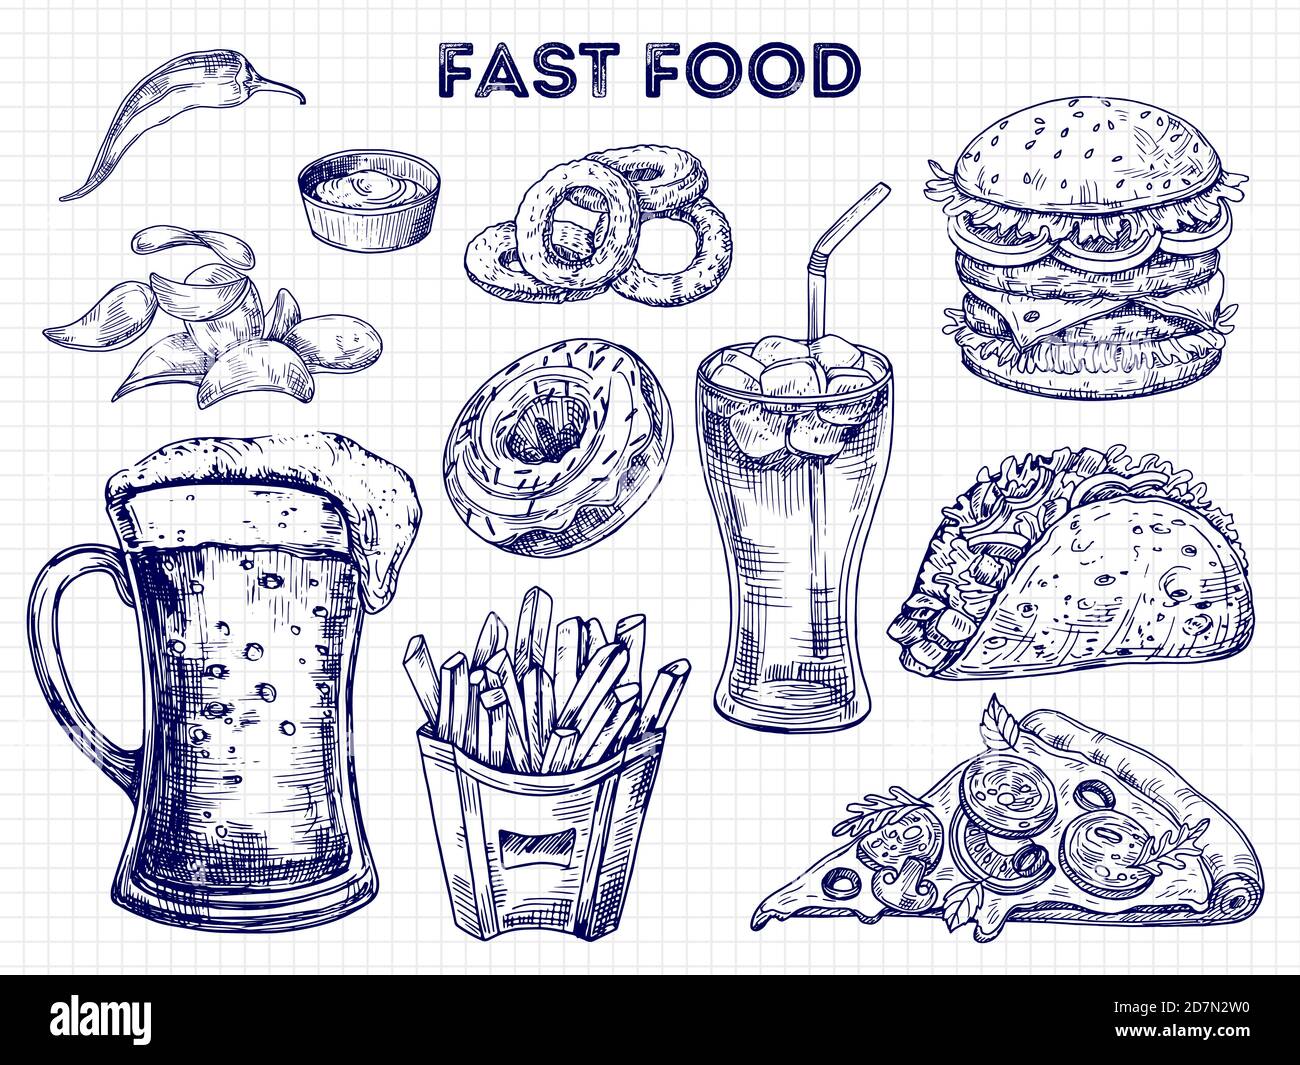 Fast food, snacks and drinks sketches vector illustration. Hamburger sandwich, burger and pizza Stock Vector